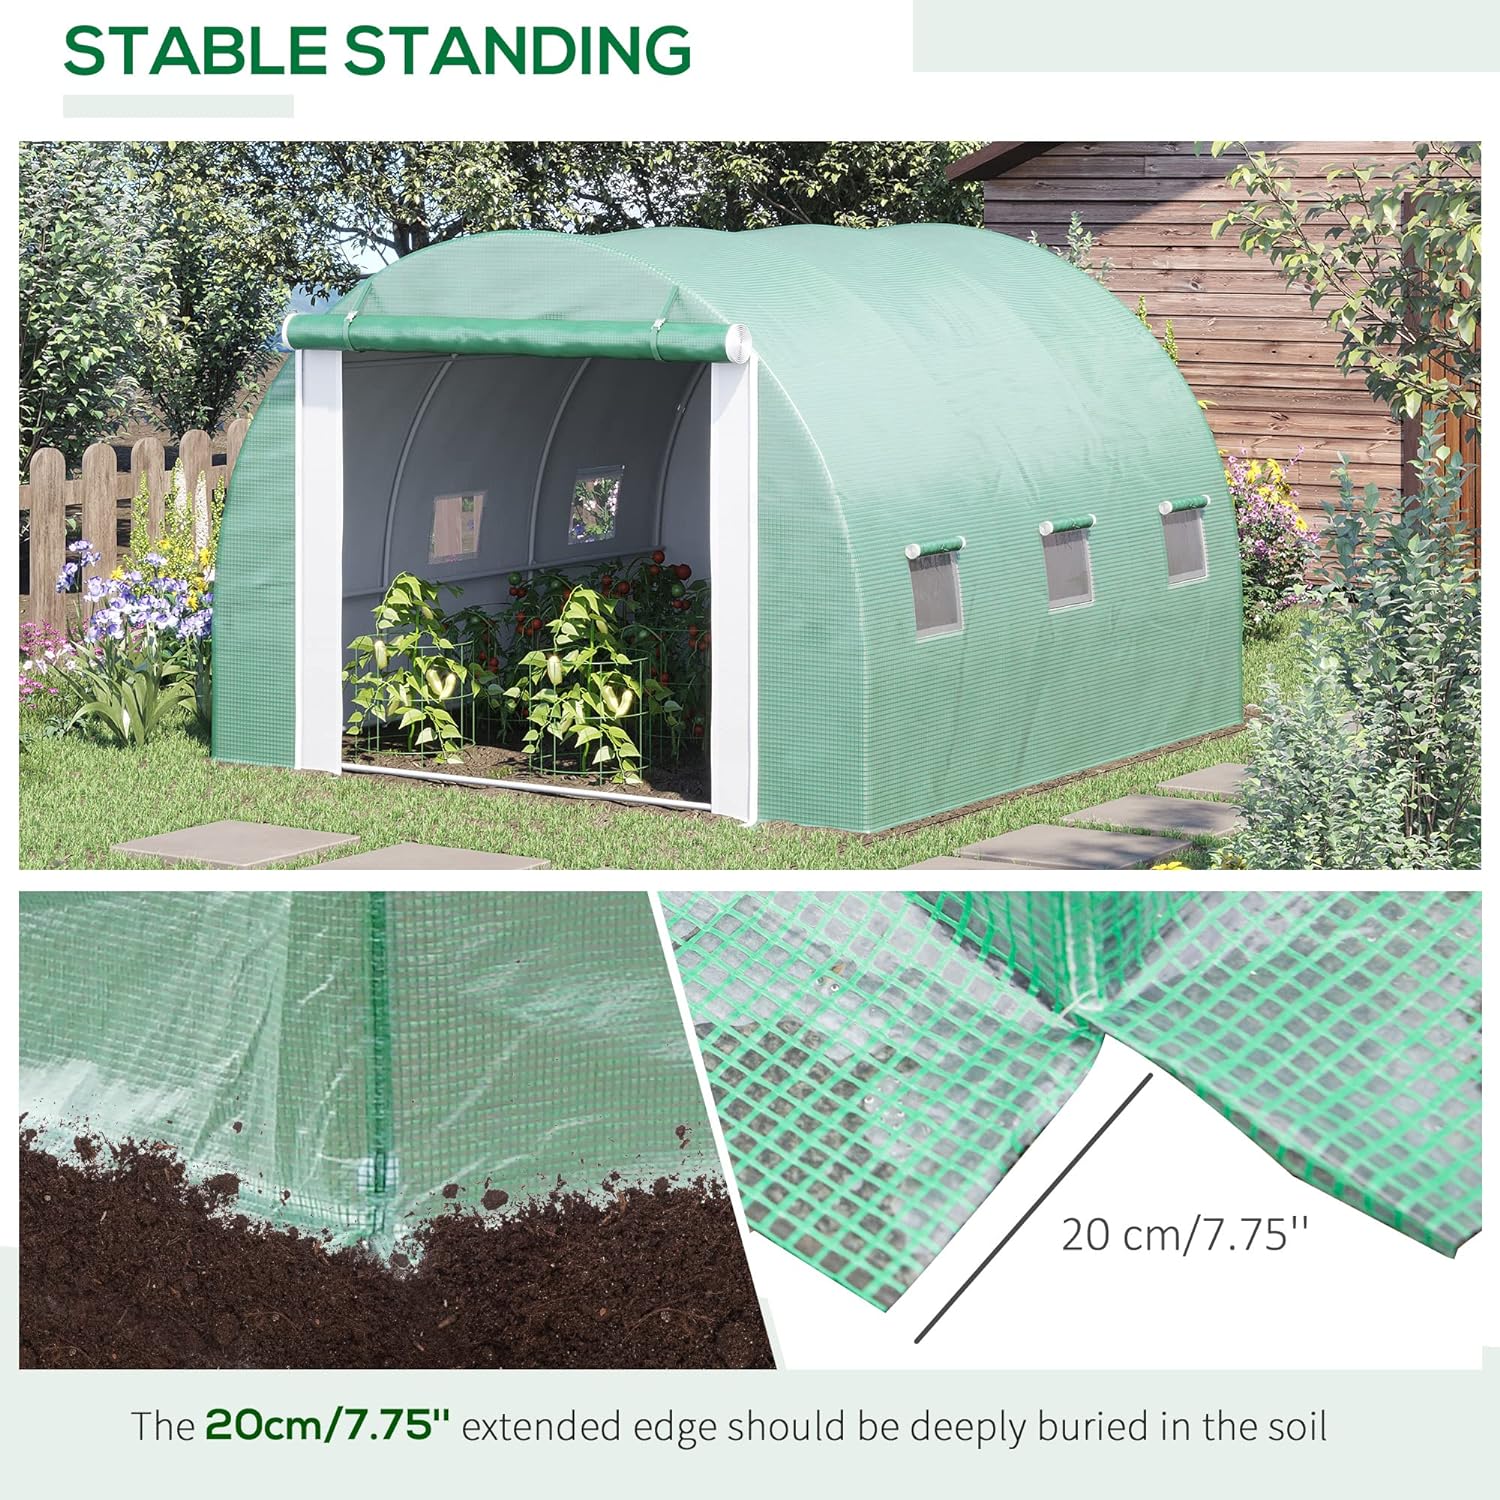 Outsunny 9.7 x 9.7 x 6.5 Large Walk-in Double Cover Polytunnel Greenhouse Outdoor w/ Roll-Up Zipper Doors and Windows Grow Plants, Seedlings, Herbs, or Flowers in Any Season-Gardening